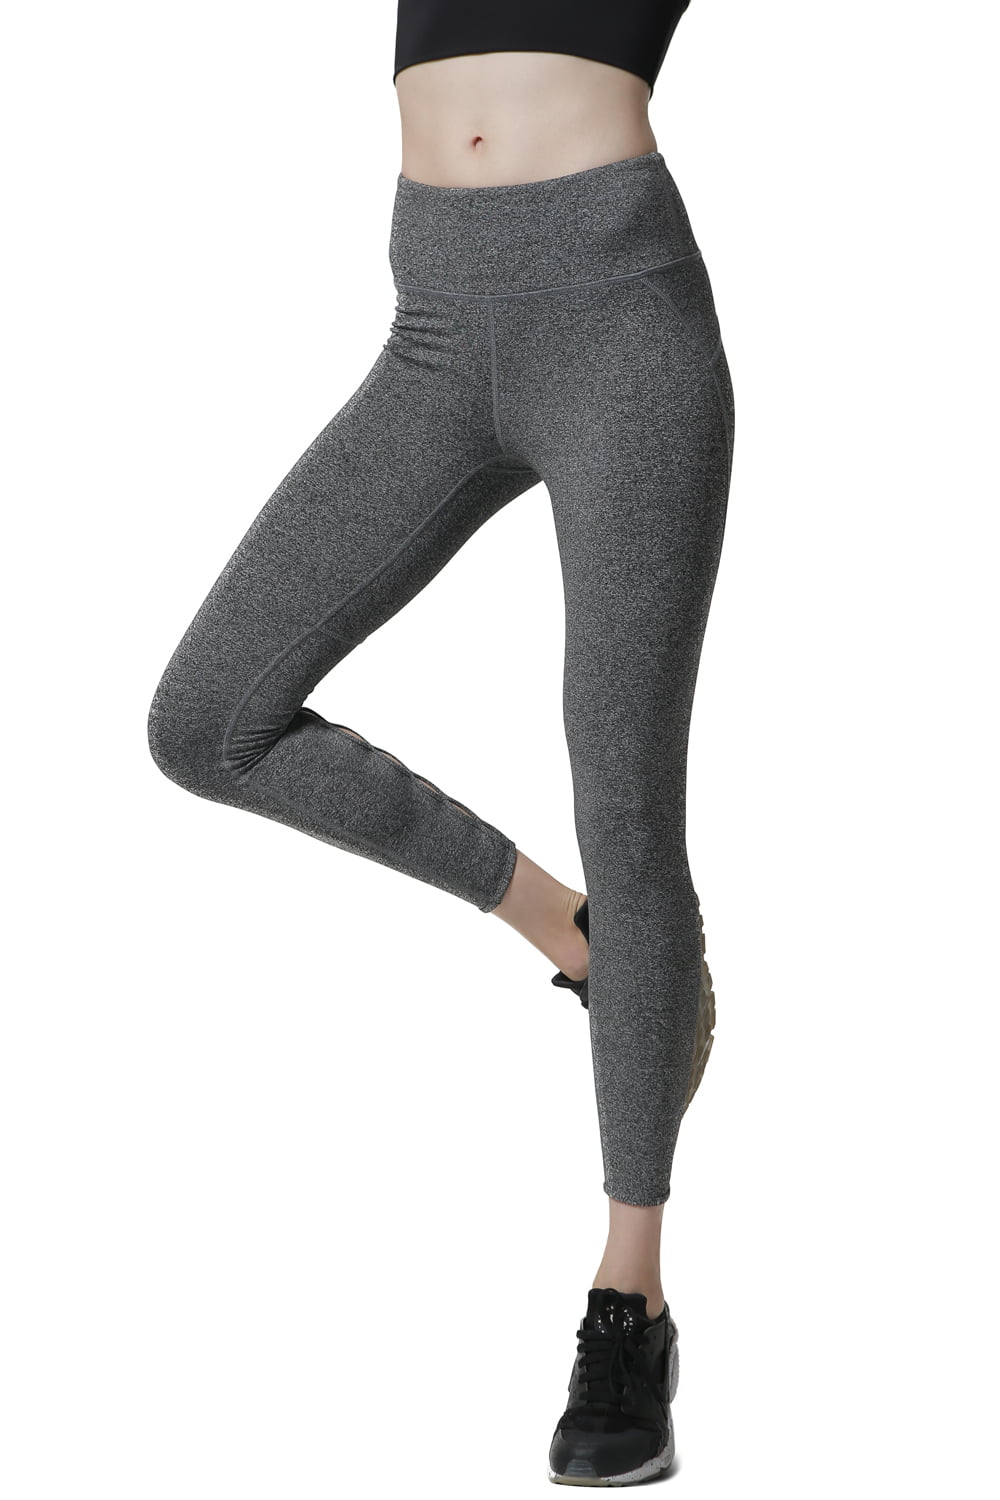 Ultra Soft Activewear TD Collections Workout Leggings High Waisted 4 ...